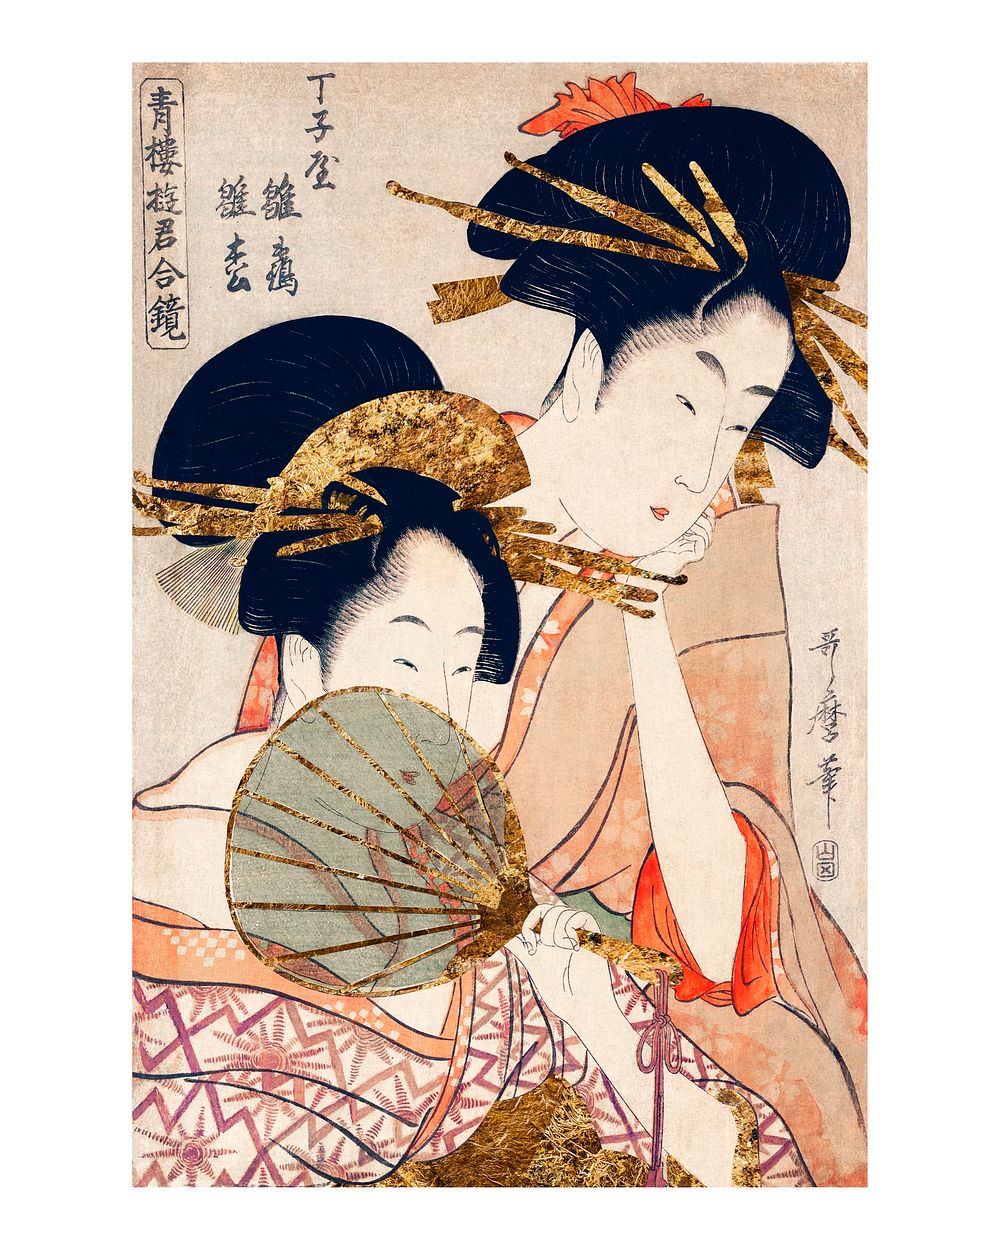 Traditional Japanese women vintage illustrationwall art print and poster.